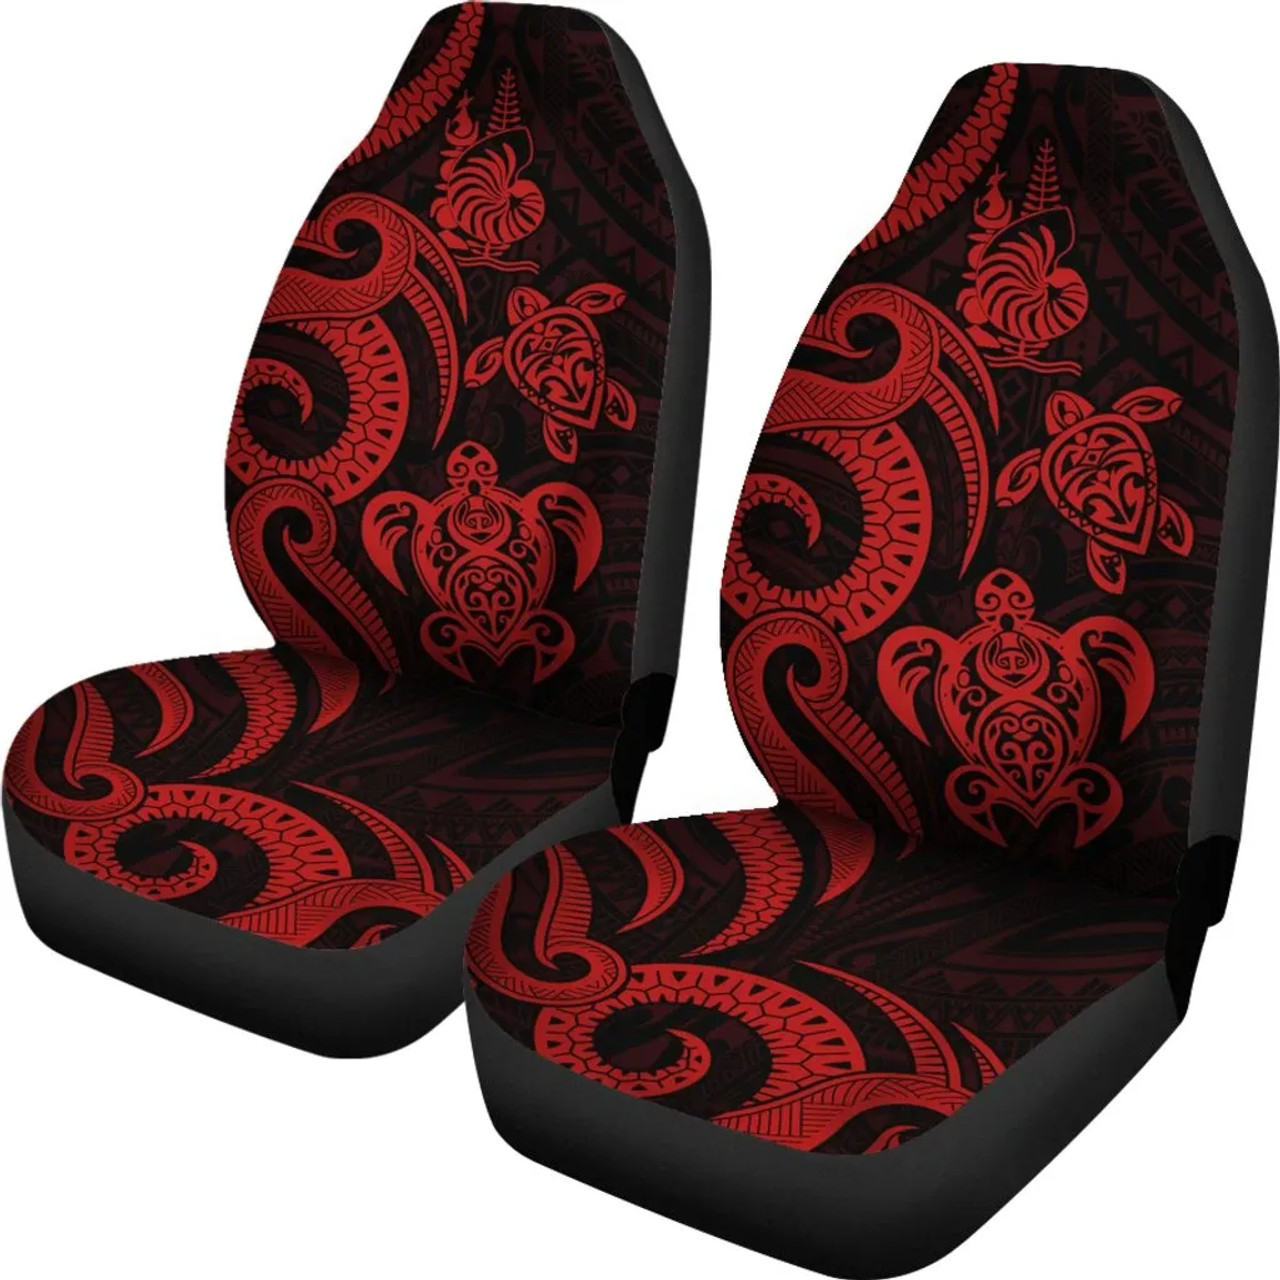 New Caledonia Car Seat Covers - Red Tentacle Turtle